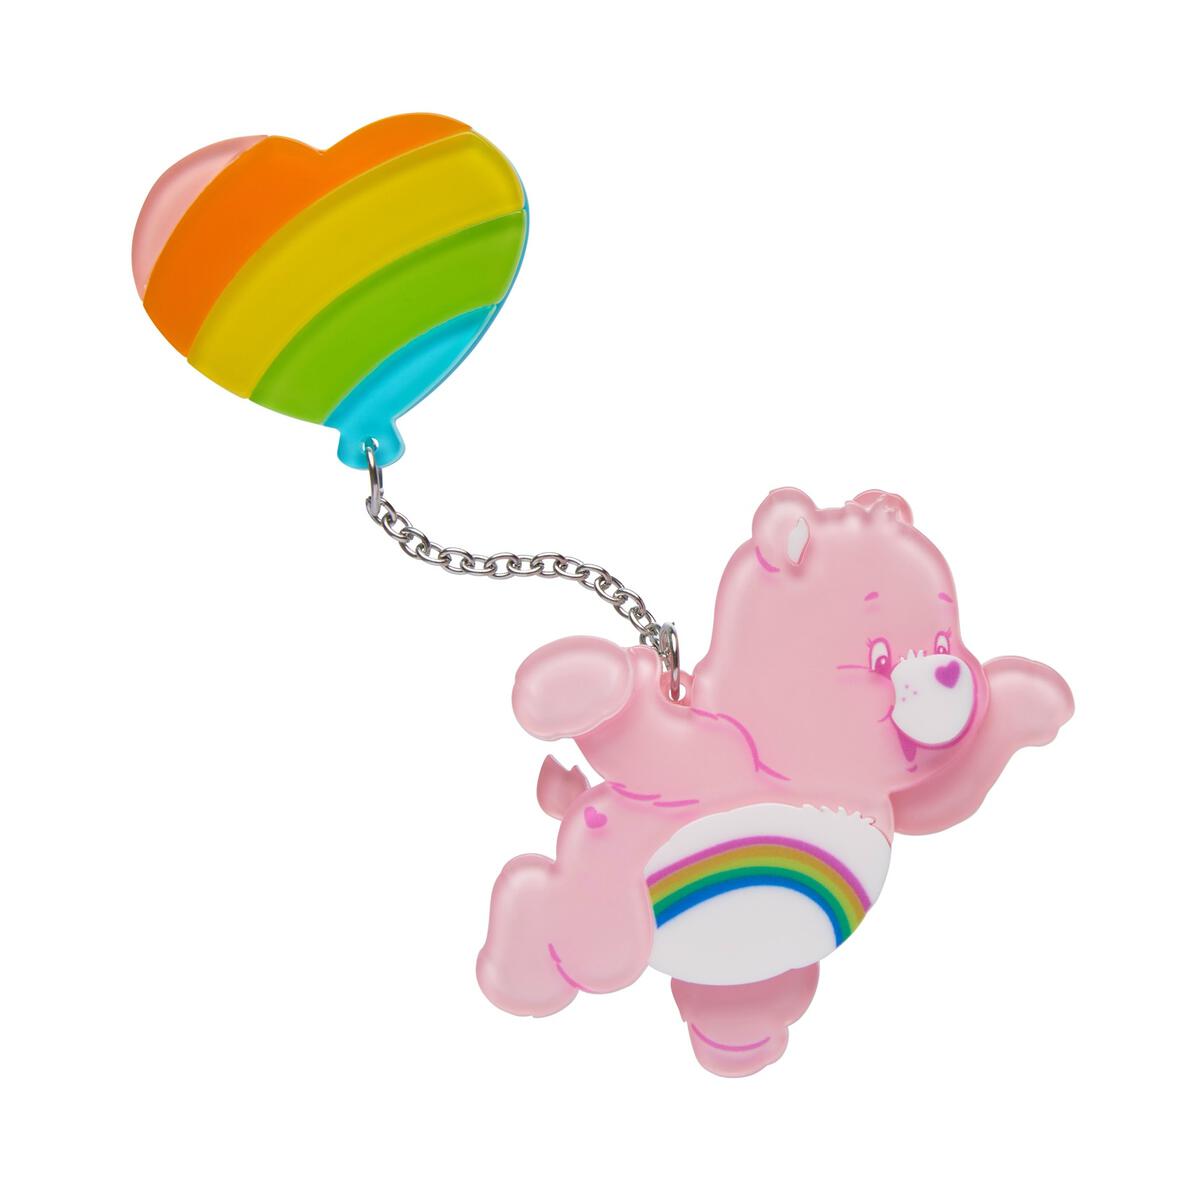 Care Bears Collection "Cheer Bear in the Sky" pink bear white with belly rainbow design chain linked to rainbow heart balloon layered resin brooch